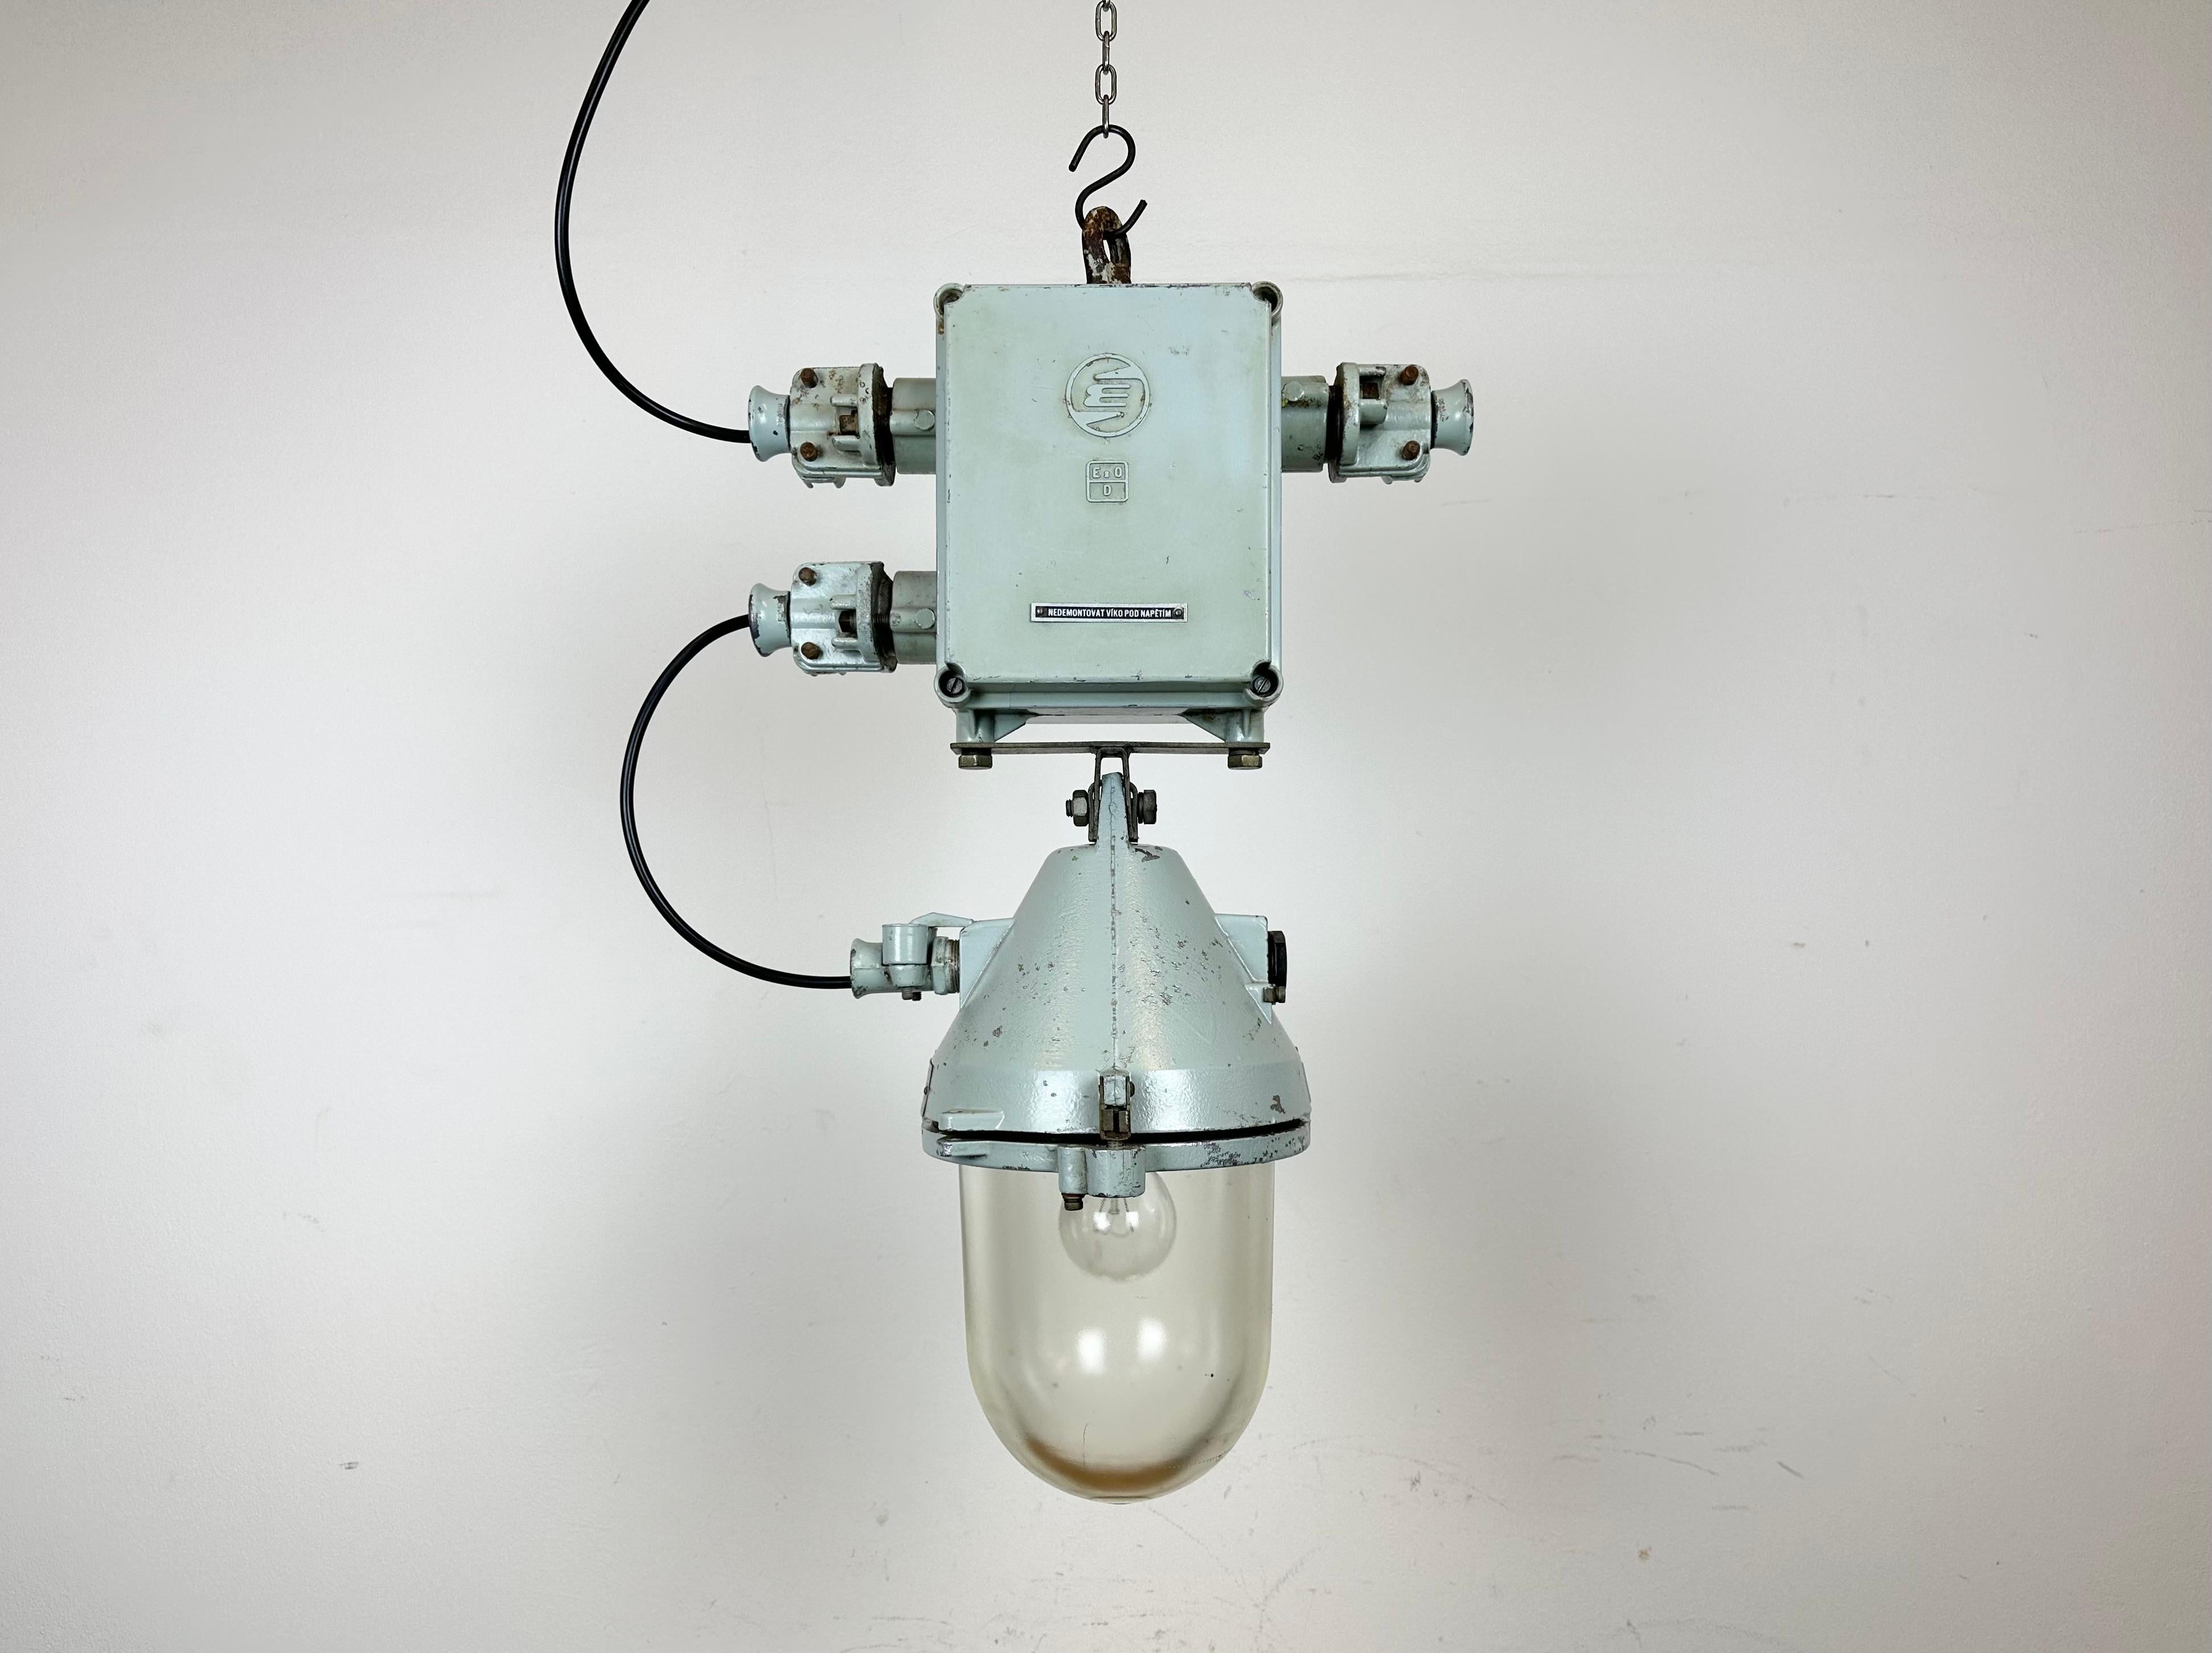 Grey industrial explosion proof light with massive protective glass bulb. Made in former Czechoslovakia by Elektrosvit during the 1970s. It features a cast aluminium body and a clear glass cover. The original porcelain socket requires standard E27/